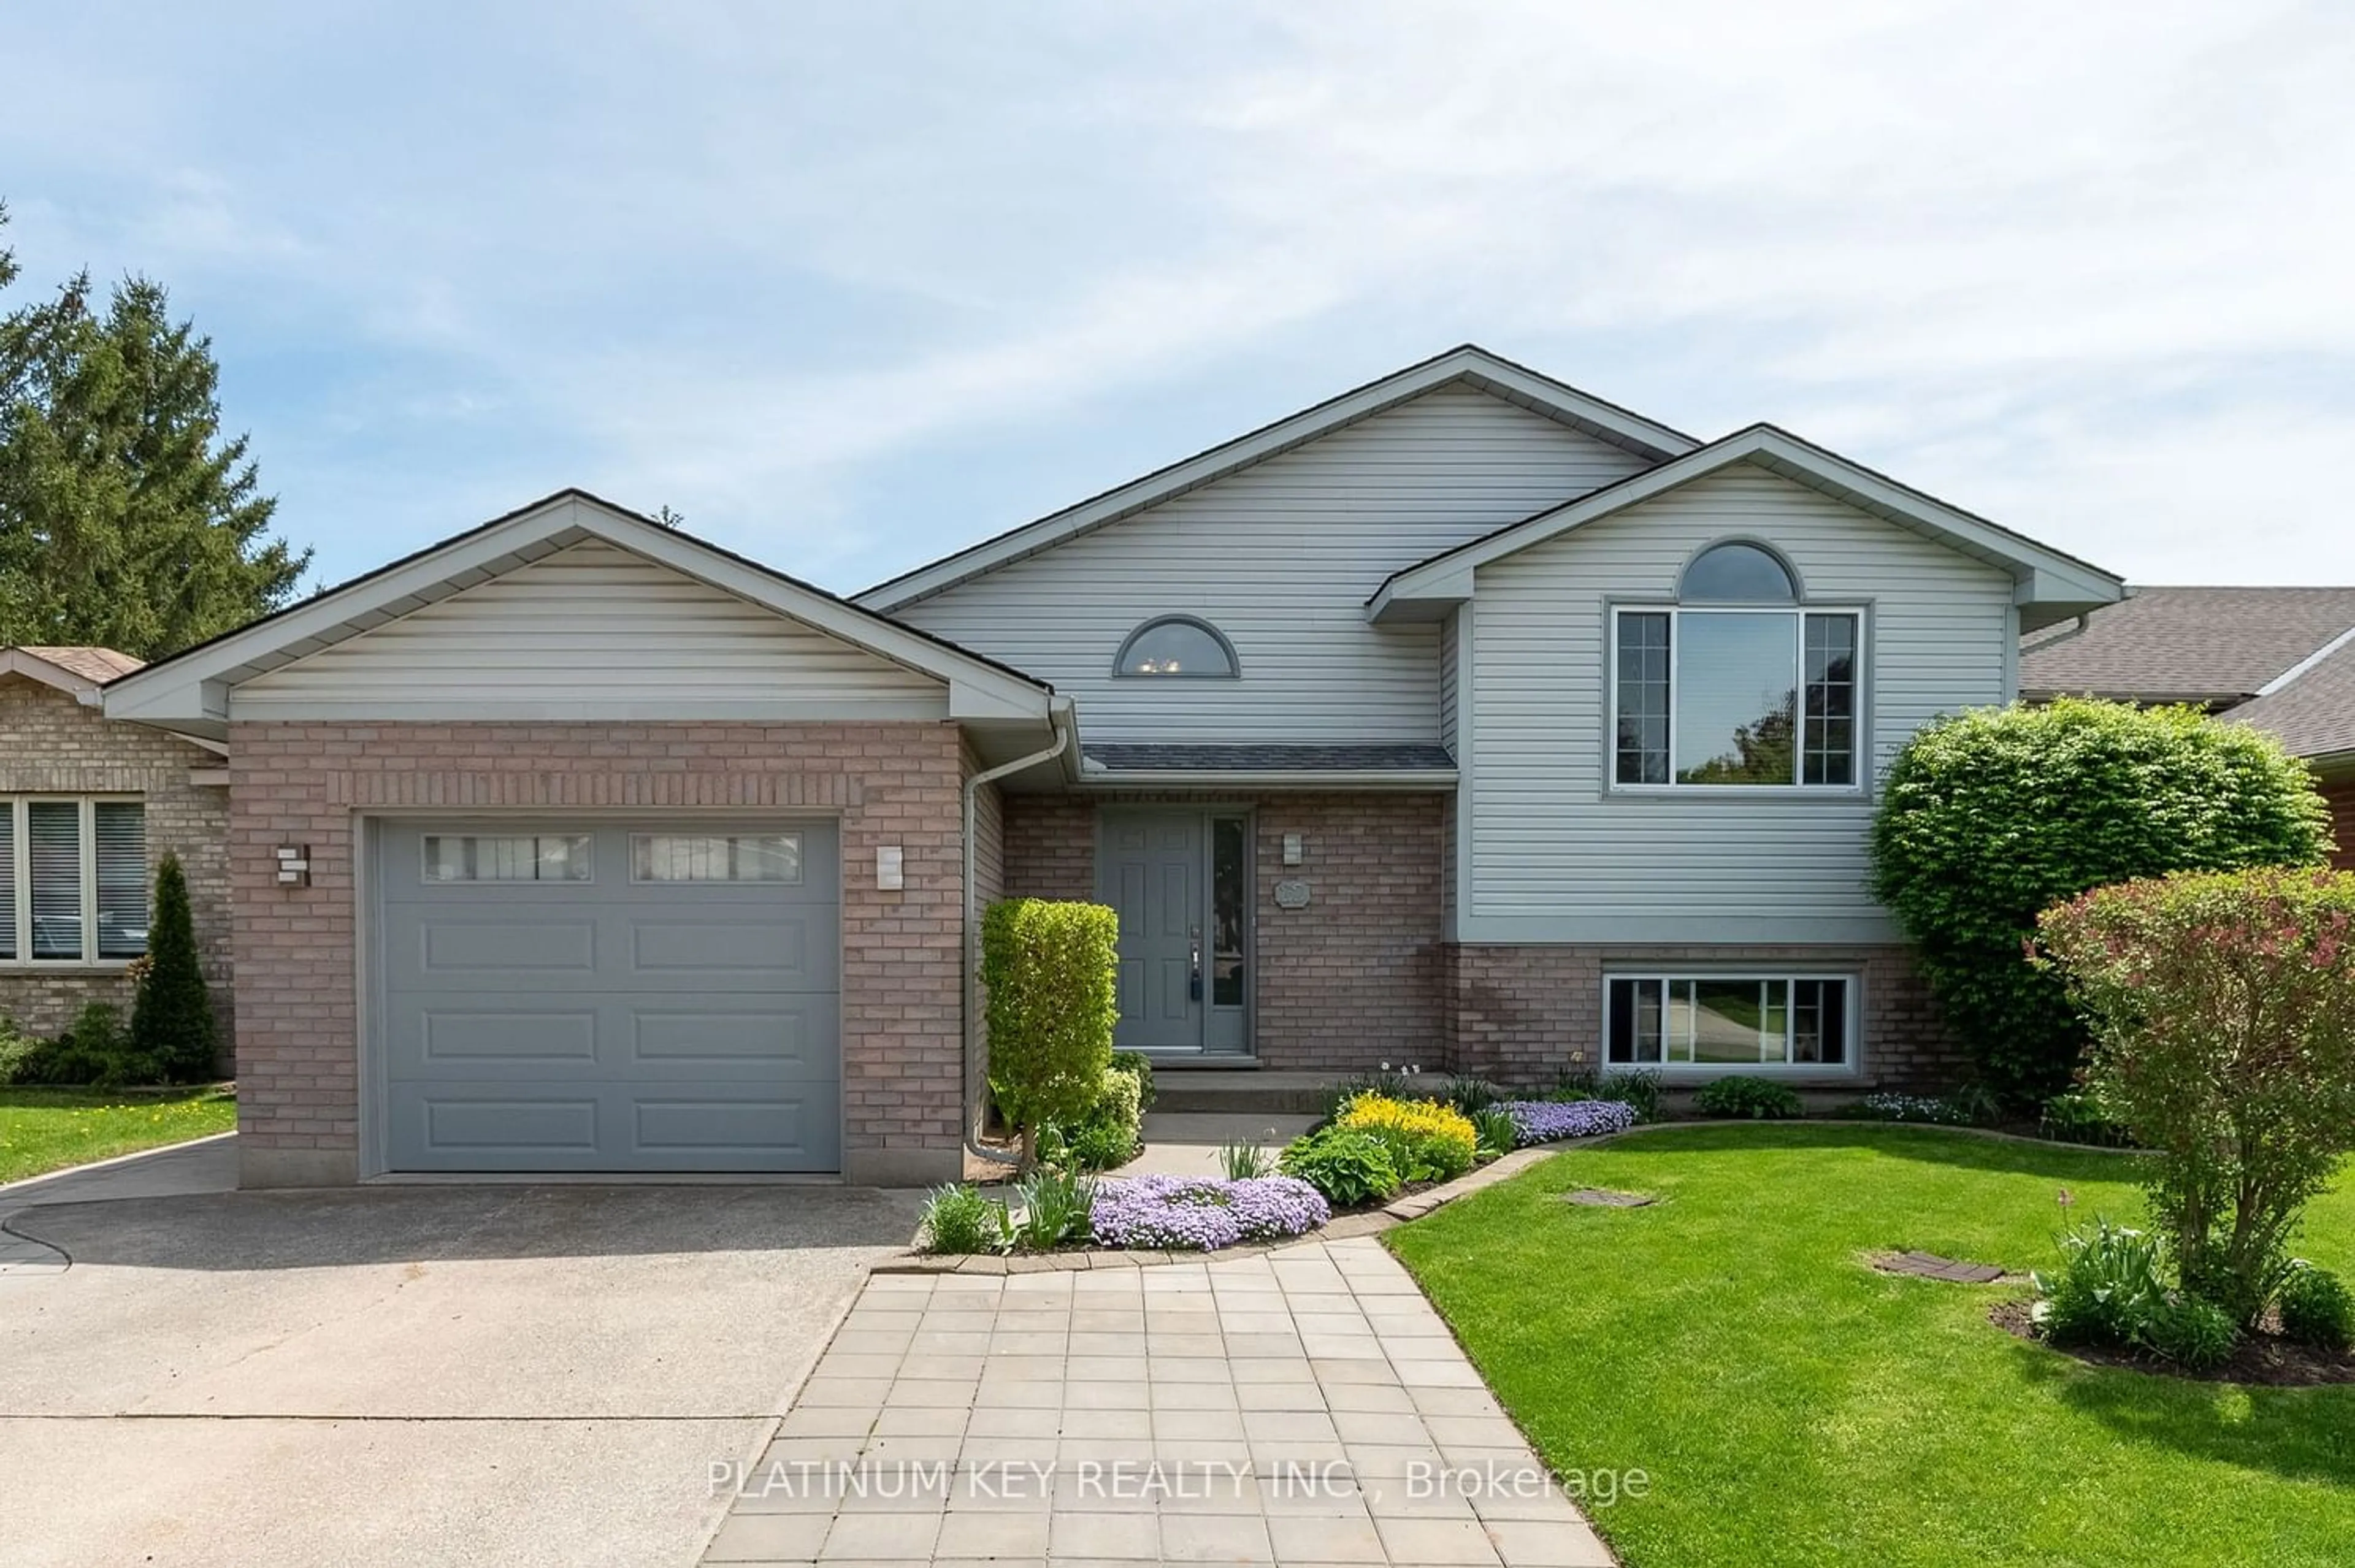 Frontside or backside of a home for 22 Parkview Dr, Strathroy-Caradoc Ontario N7G 4A1